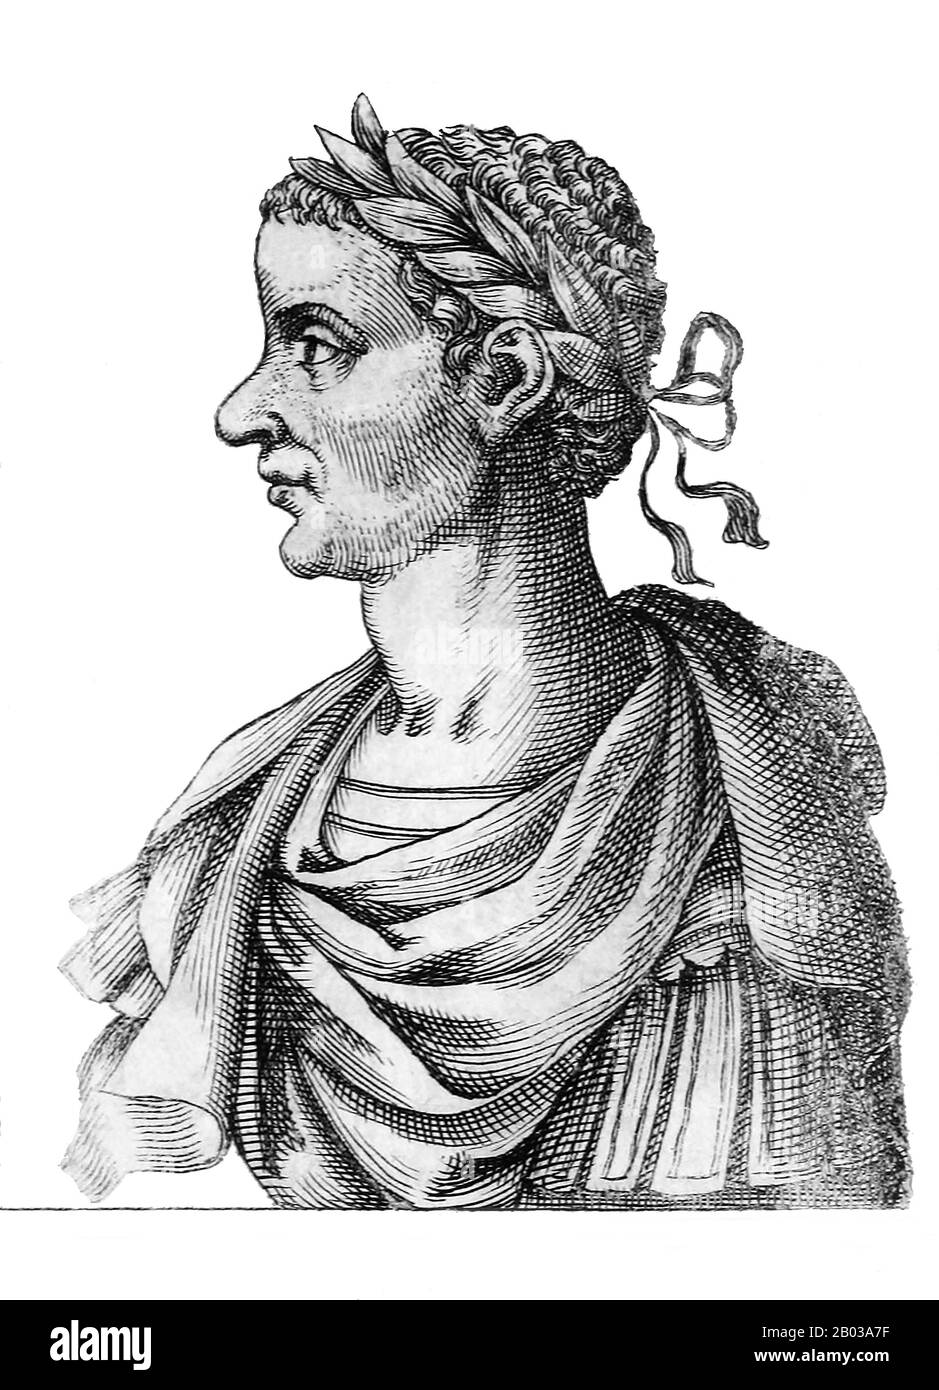 Hostilian (230-251) was the second son of Emperor Trajan Decius and younger brother of Emperor Herennius Etruscus. He became an imperial prince after his father ascended to the throne, but was constantly in the shadow of his brother, who was heir.  After Decius and Herennius were killed during the Battle of Abrittus on the Danubian frontier in 251, the armies in the Danube declared respected General Trebonianus Gallus as emperor, while Rome acknowledged Hostilian as the heir. To avoid another civil war, Trebonianus adopted Hostilian and chose to respect Rome's will, the two becoming co-emperor Stock Photo